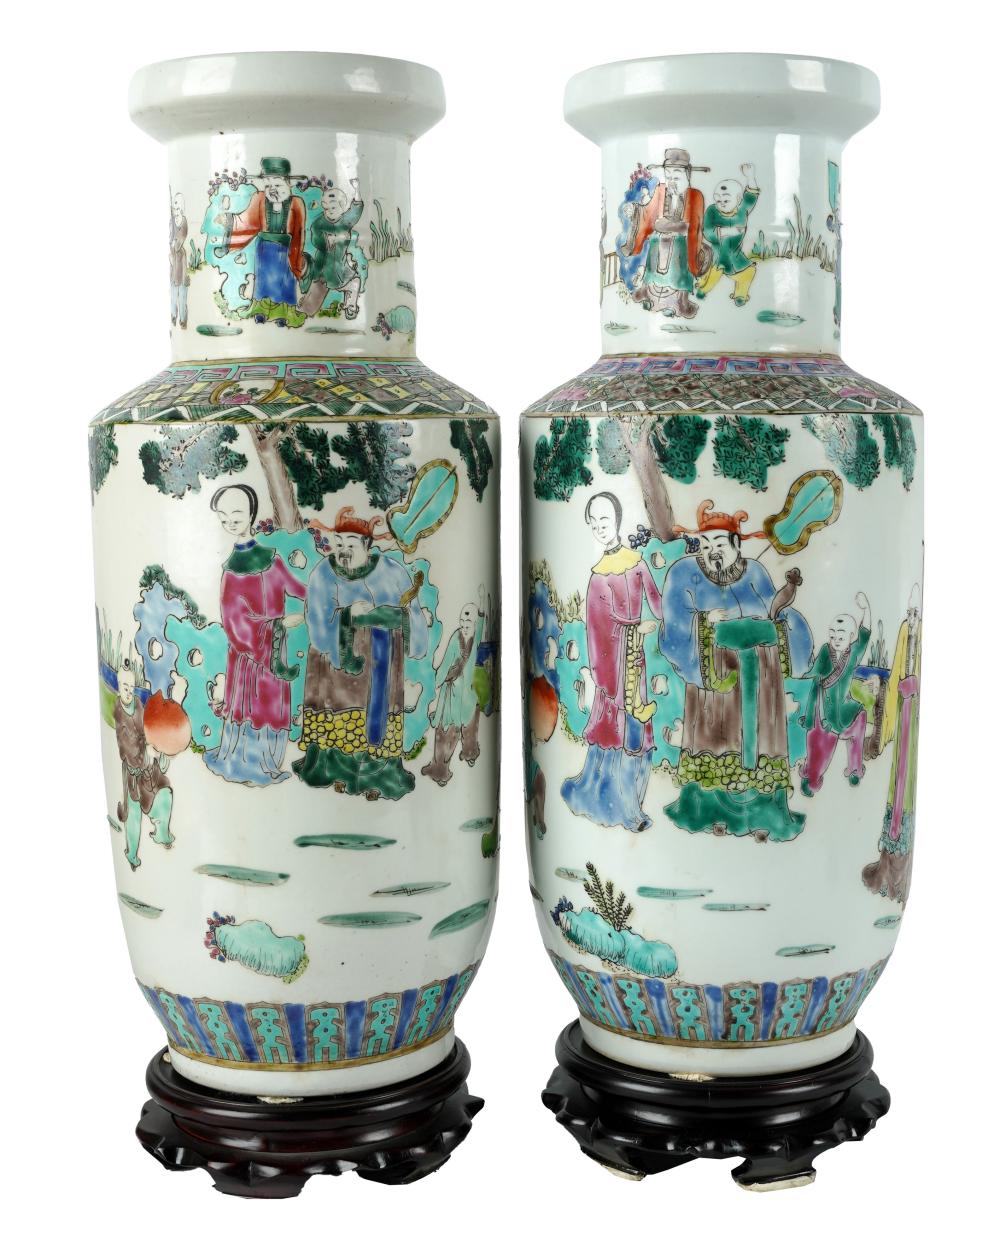 PAIR OF CHINESE PORCELAIN ROULEAU